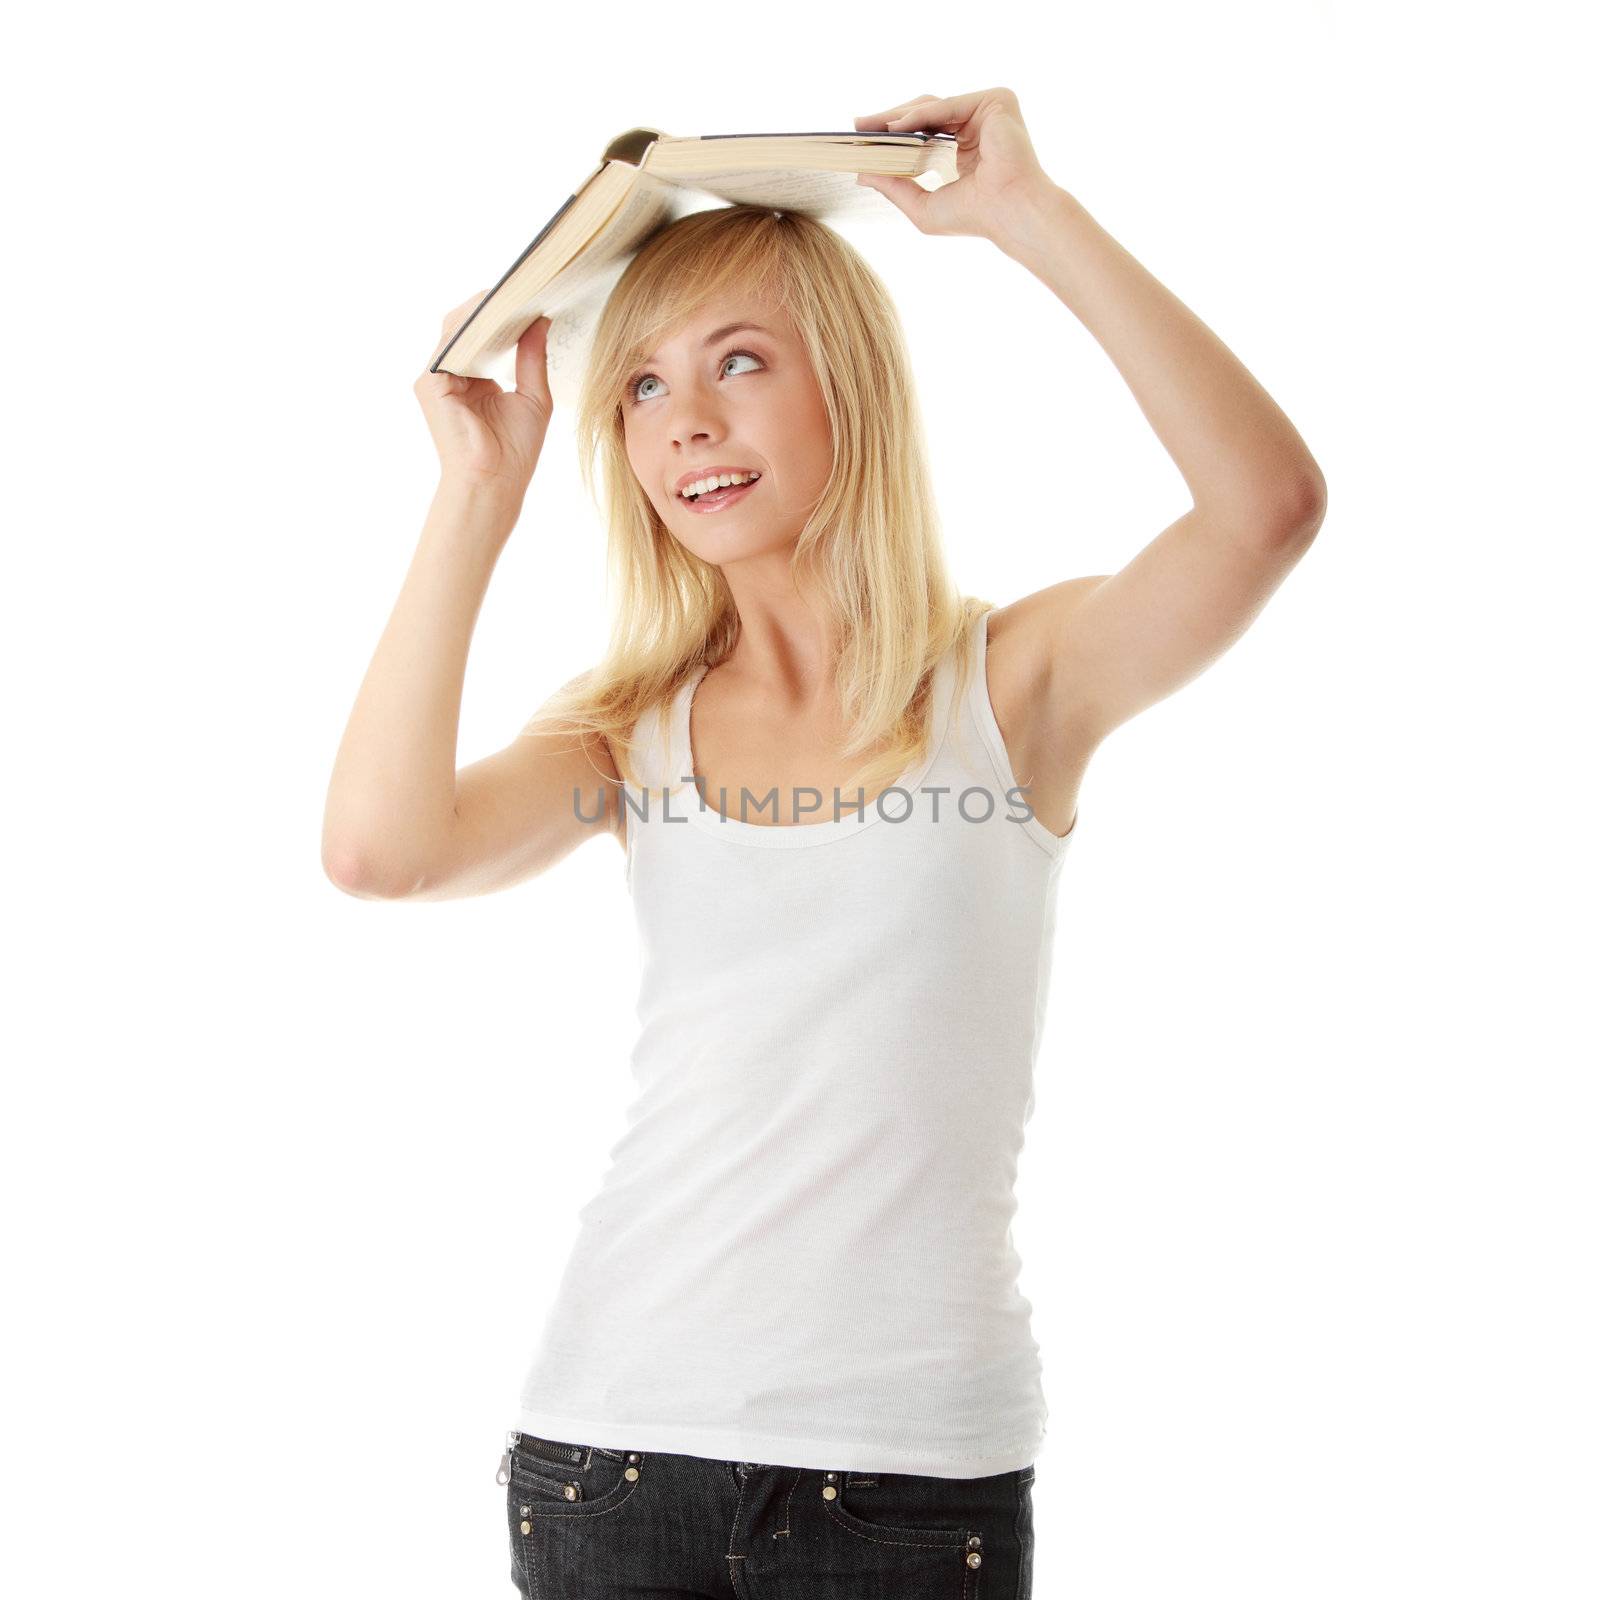 Teen girl with book over her head by BDS